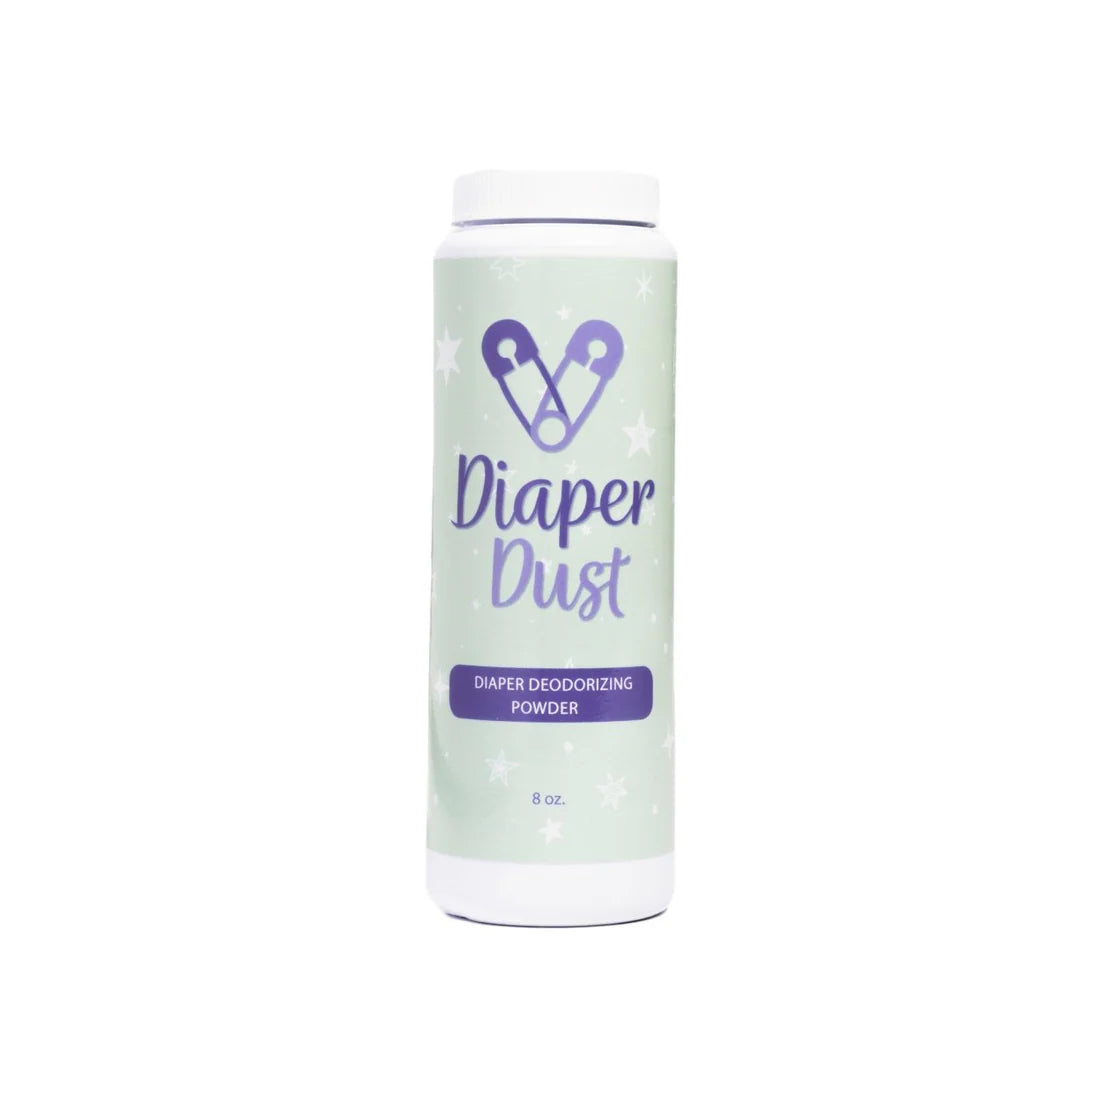 Diaper Odors disappear like magic. No Need for Plastic bags or special diaper pins. Diaper Dust.